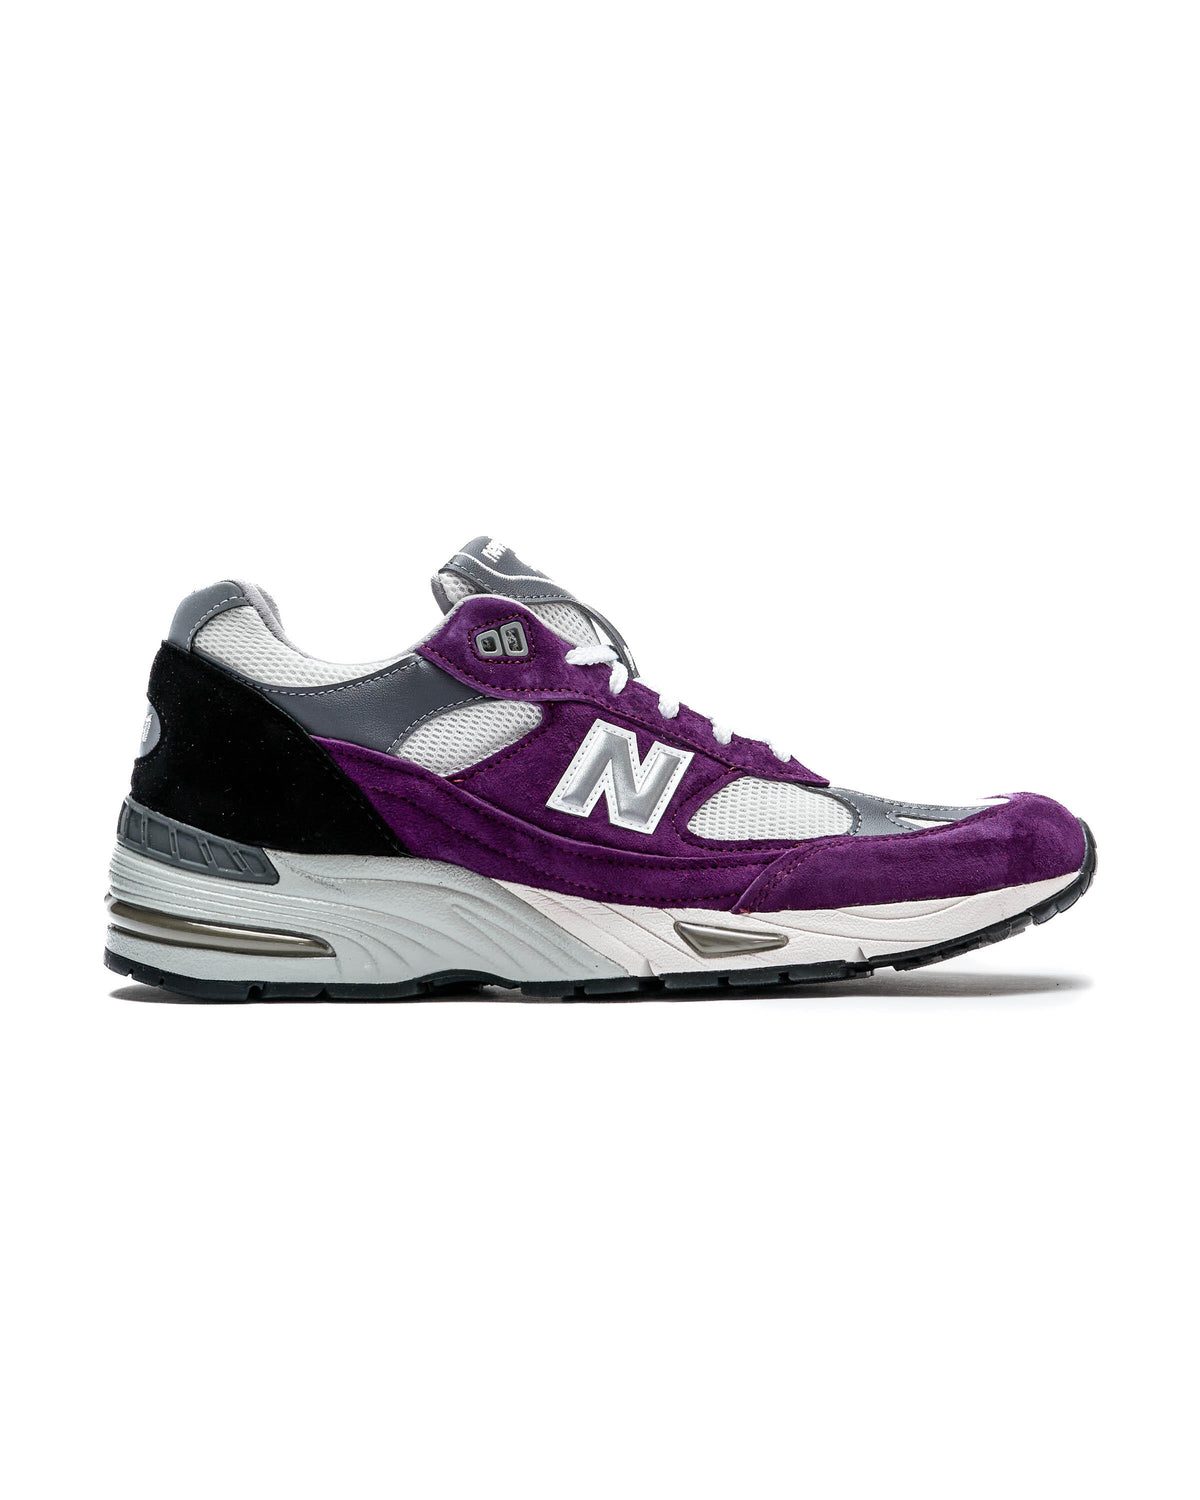 New Balance M 991 PUK - Made in England